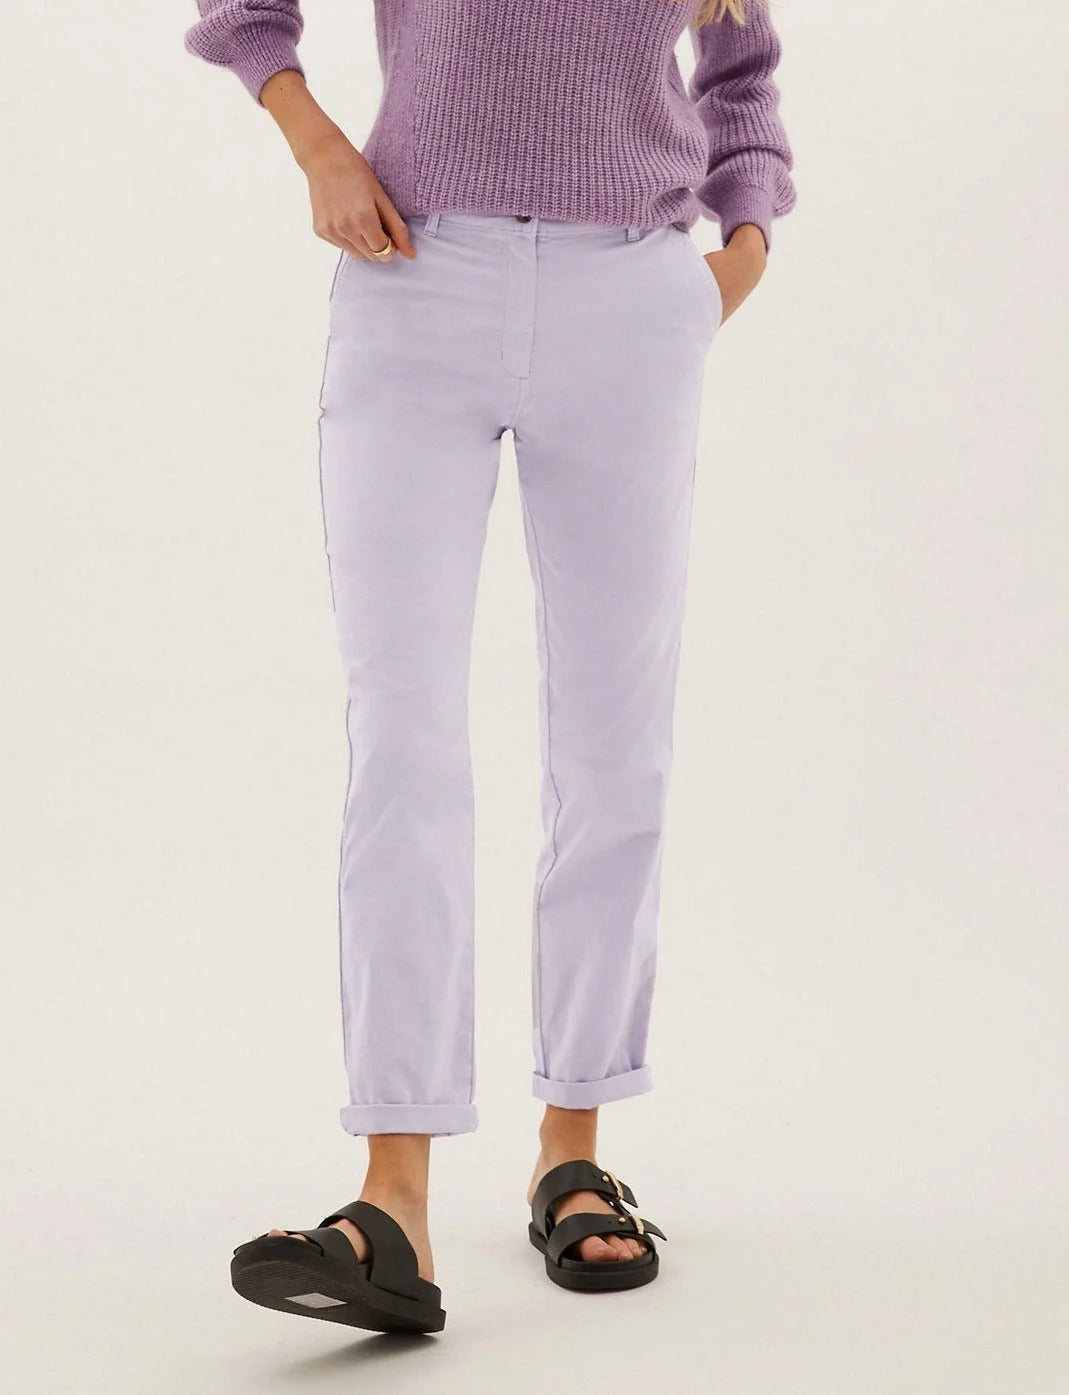 M&S Ankle Grazer Chino Trousers Lilac / 8 / Short